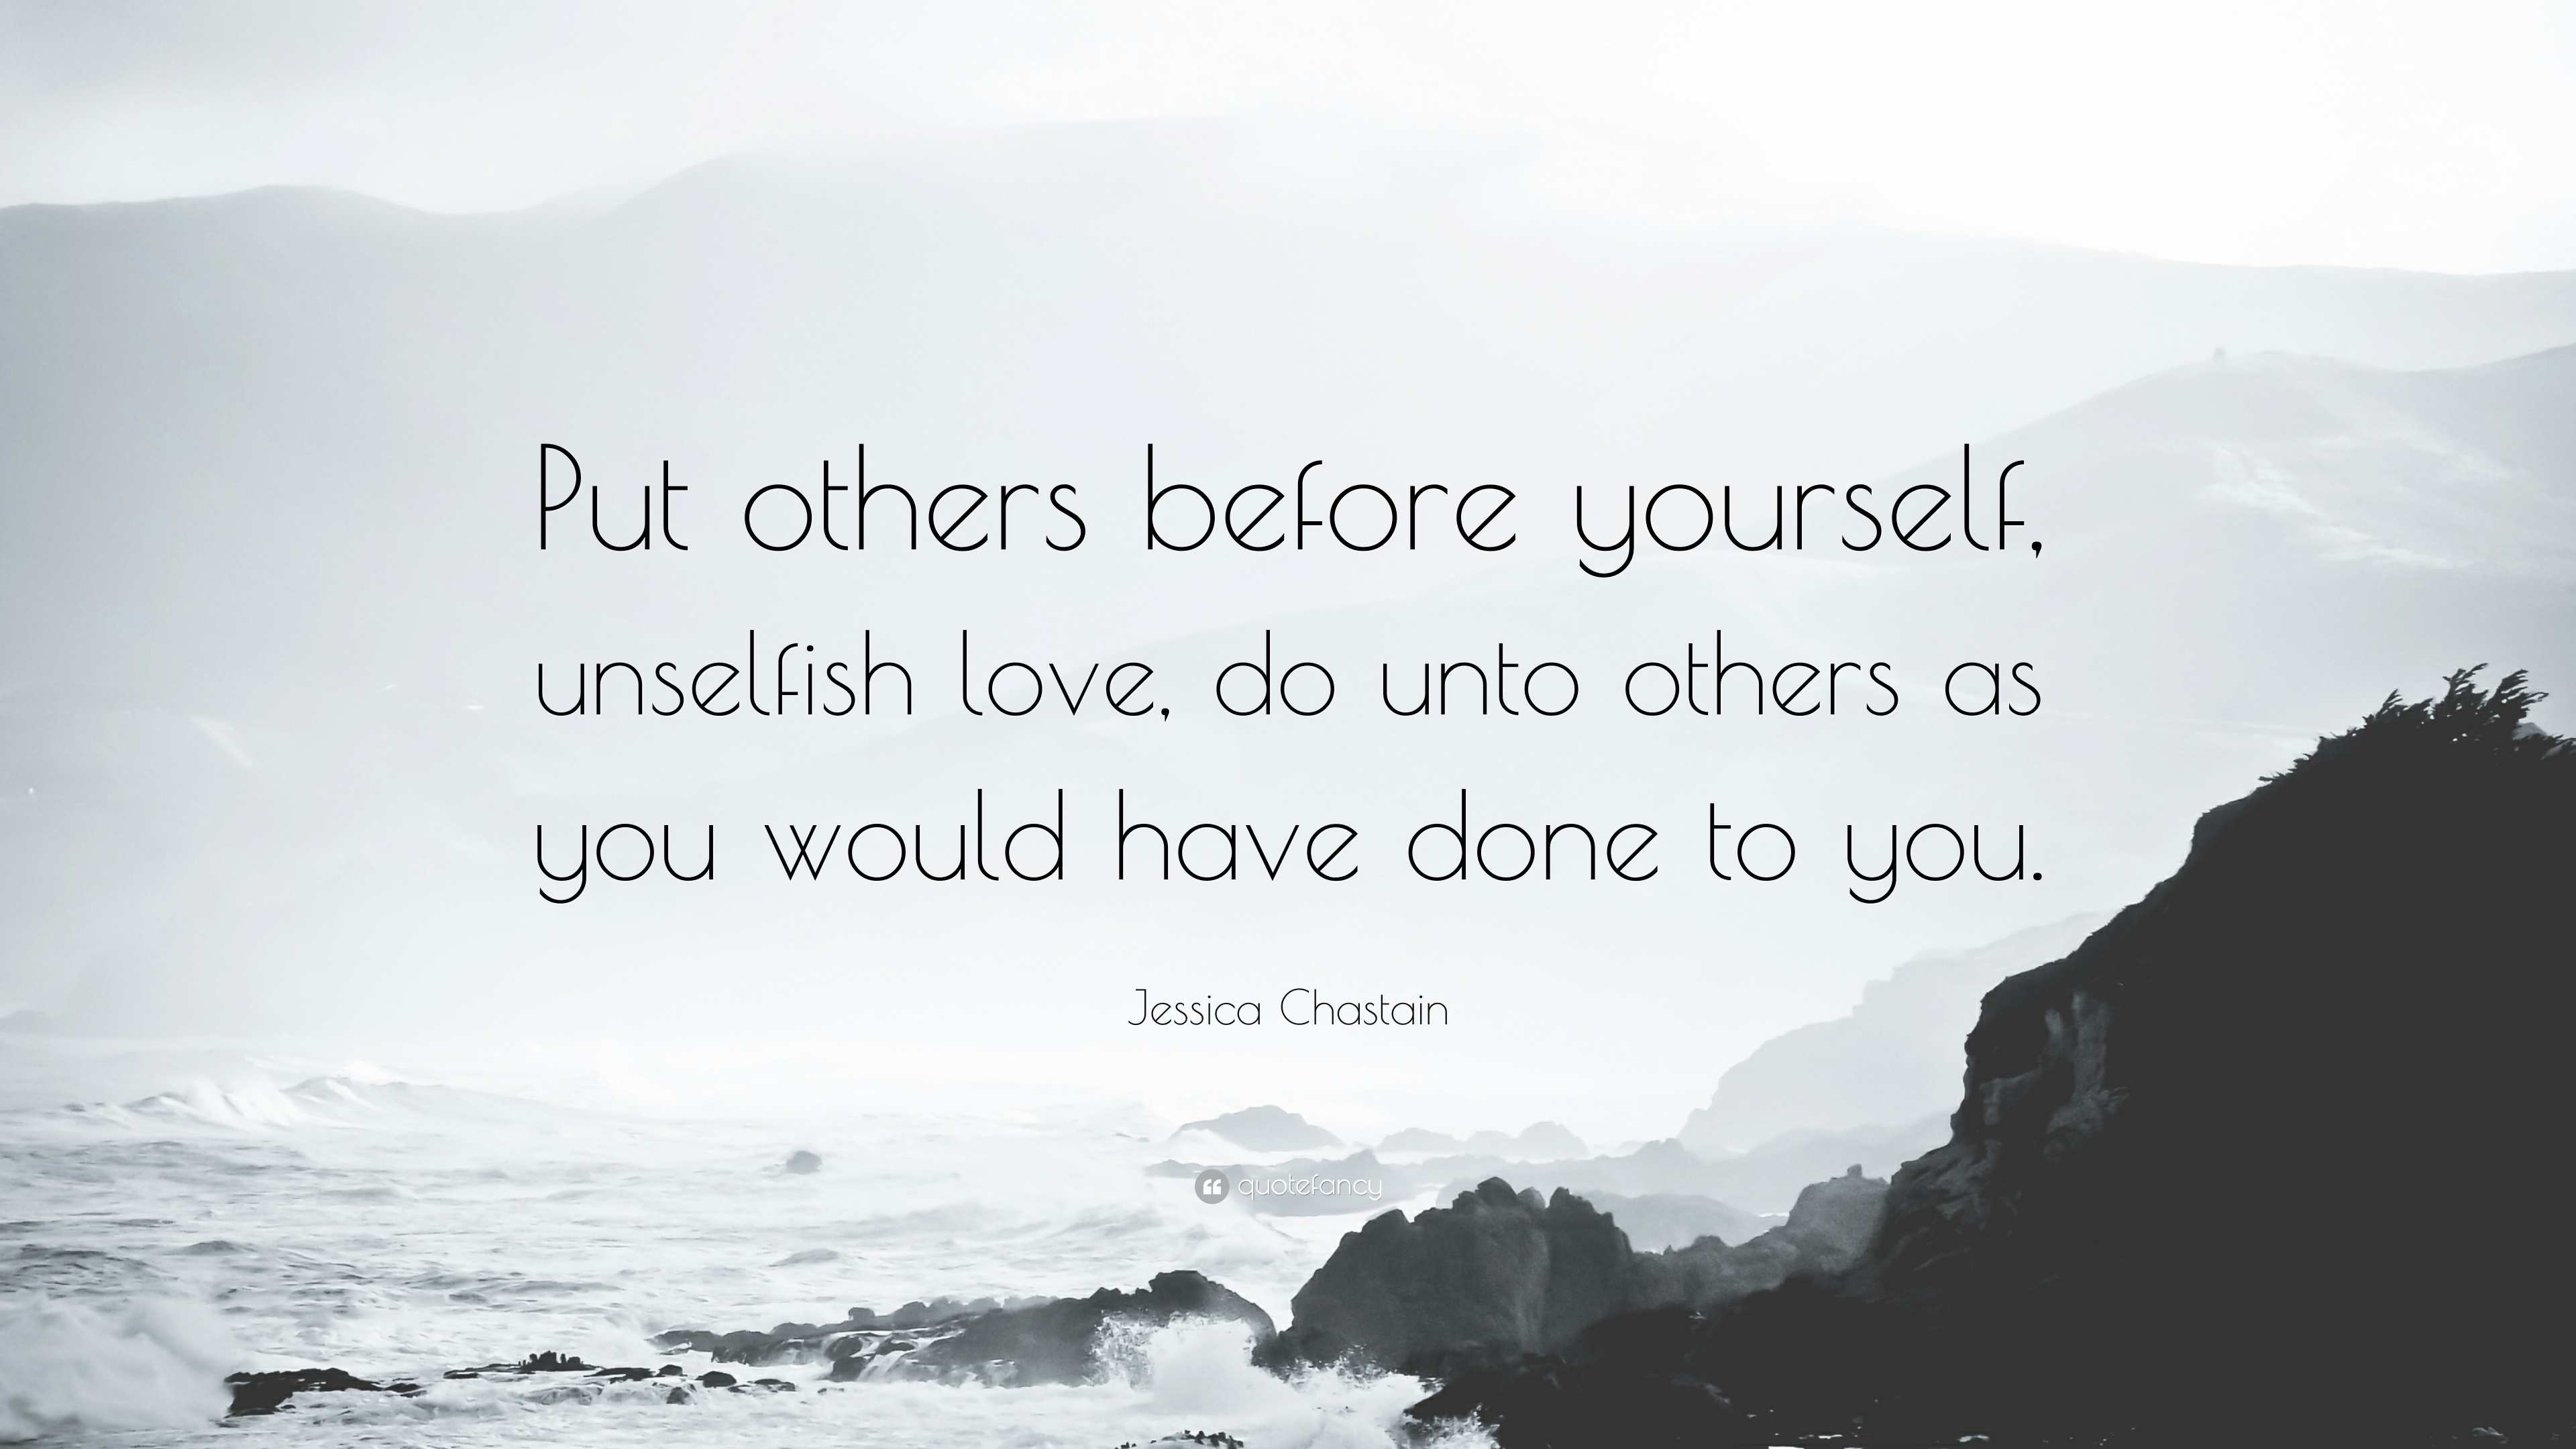 Jessica Chastain Quote: “Put others before yourself, unselfish love ...